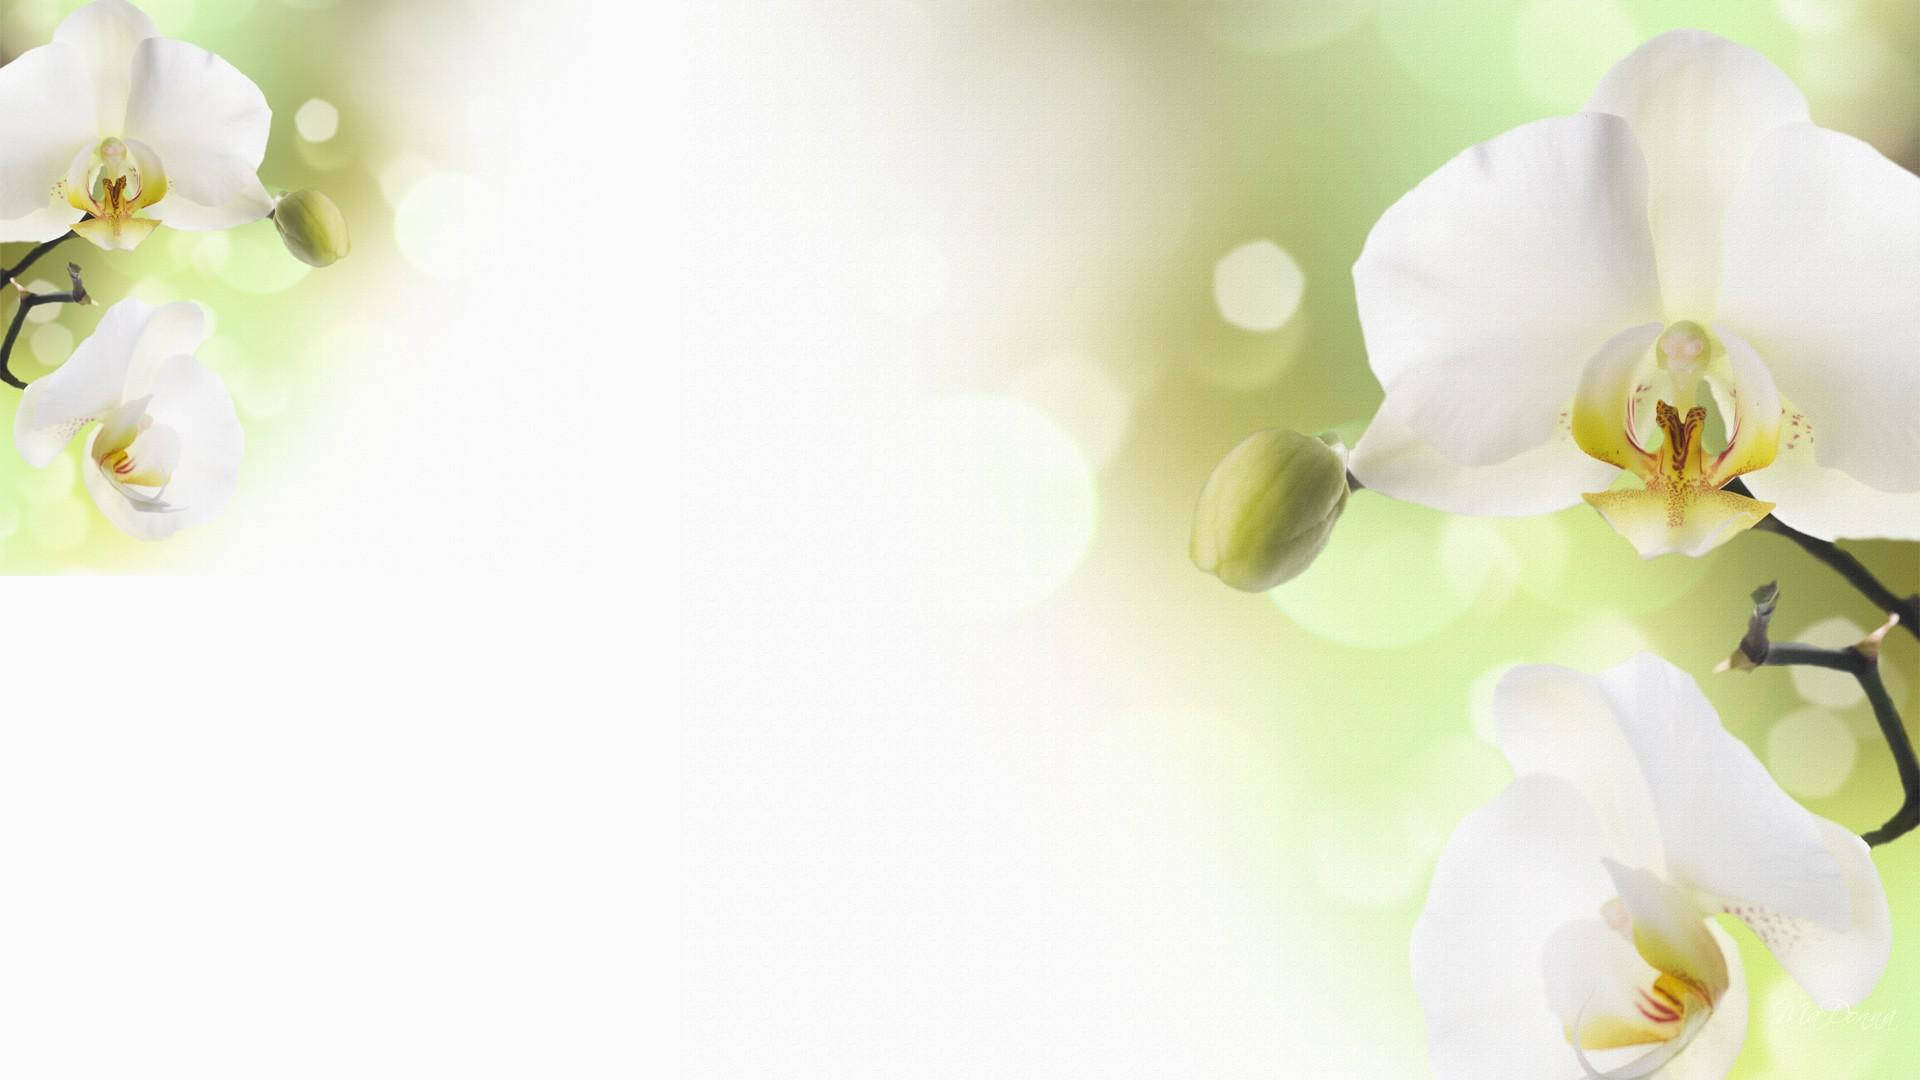 White Orchid With Lime Green Petals Wallpaper